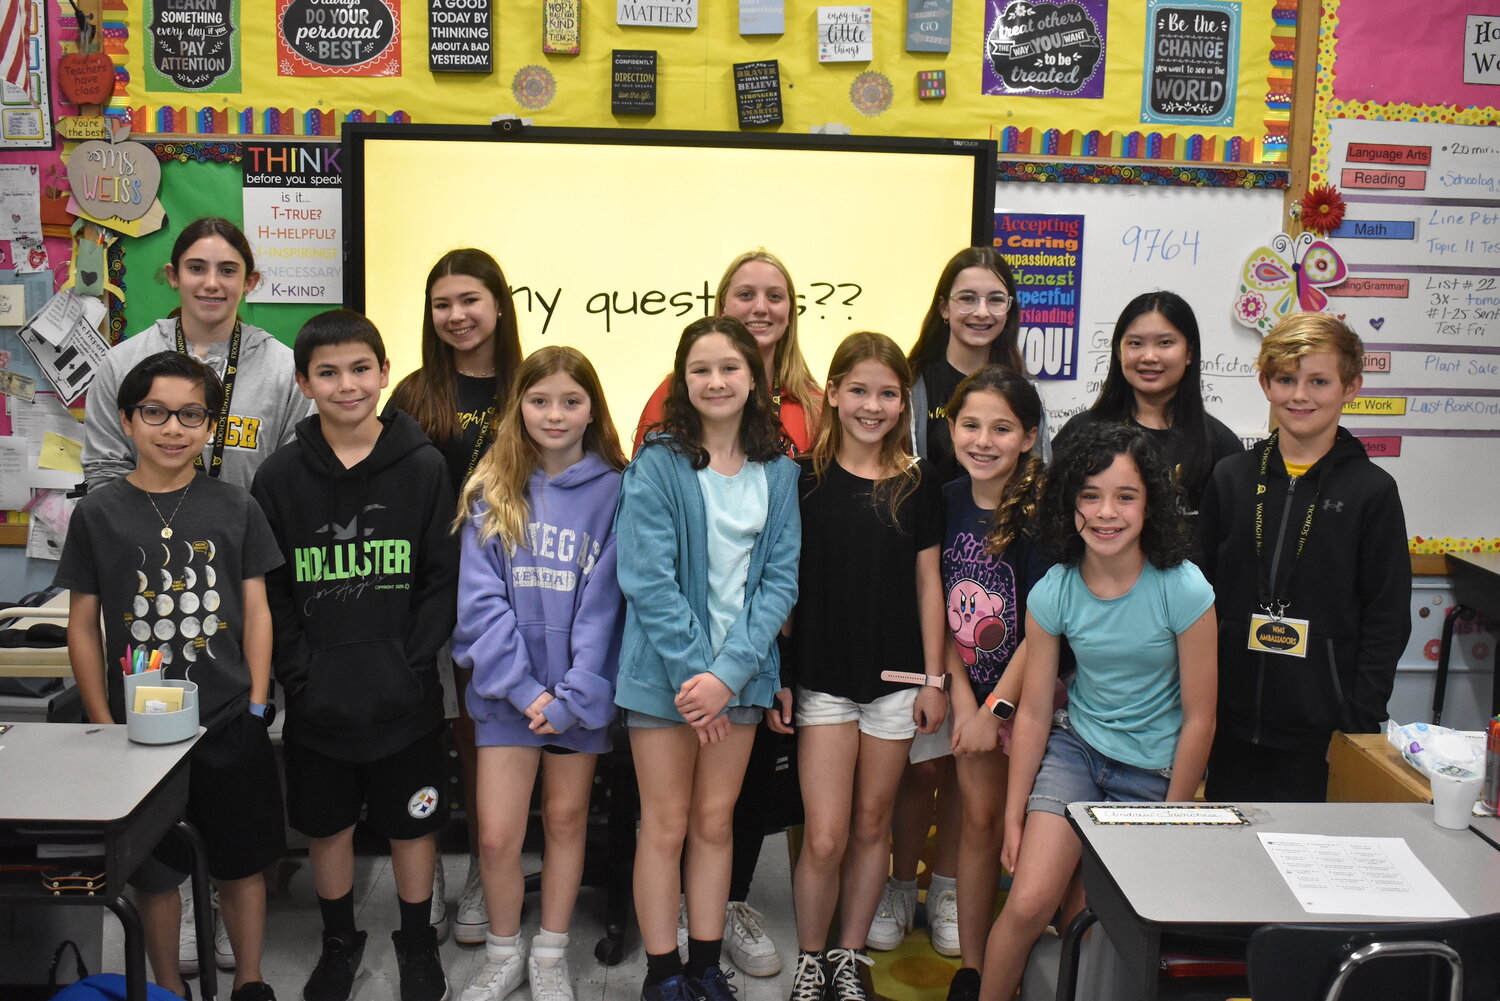 Wantagh Elementary School fifth graders were excited to meet with sixth, seventh and eighth grade students.